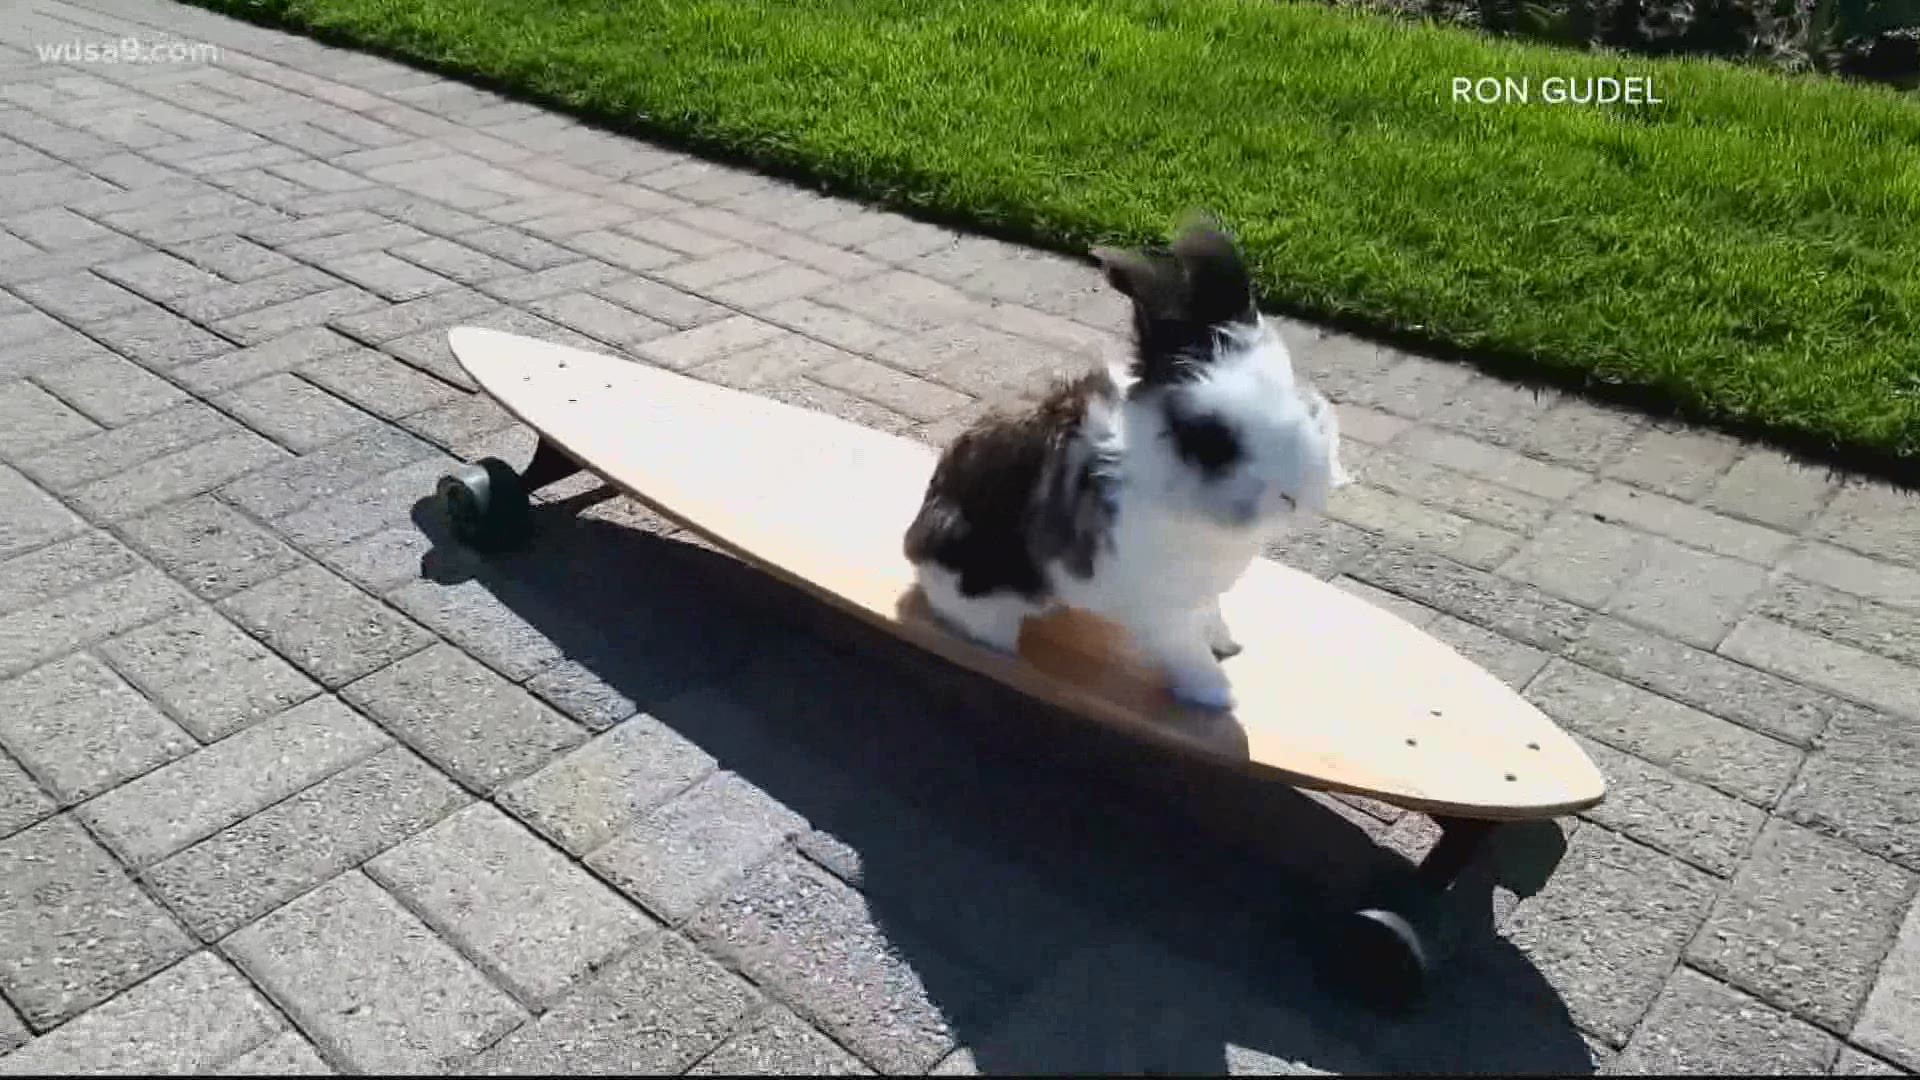 Spring weather means Cookie can cruise on his board once again.